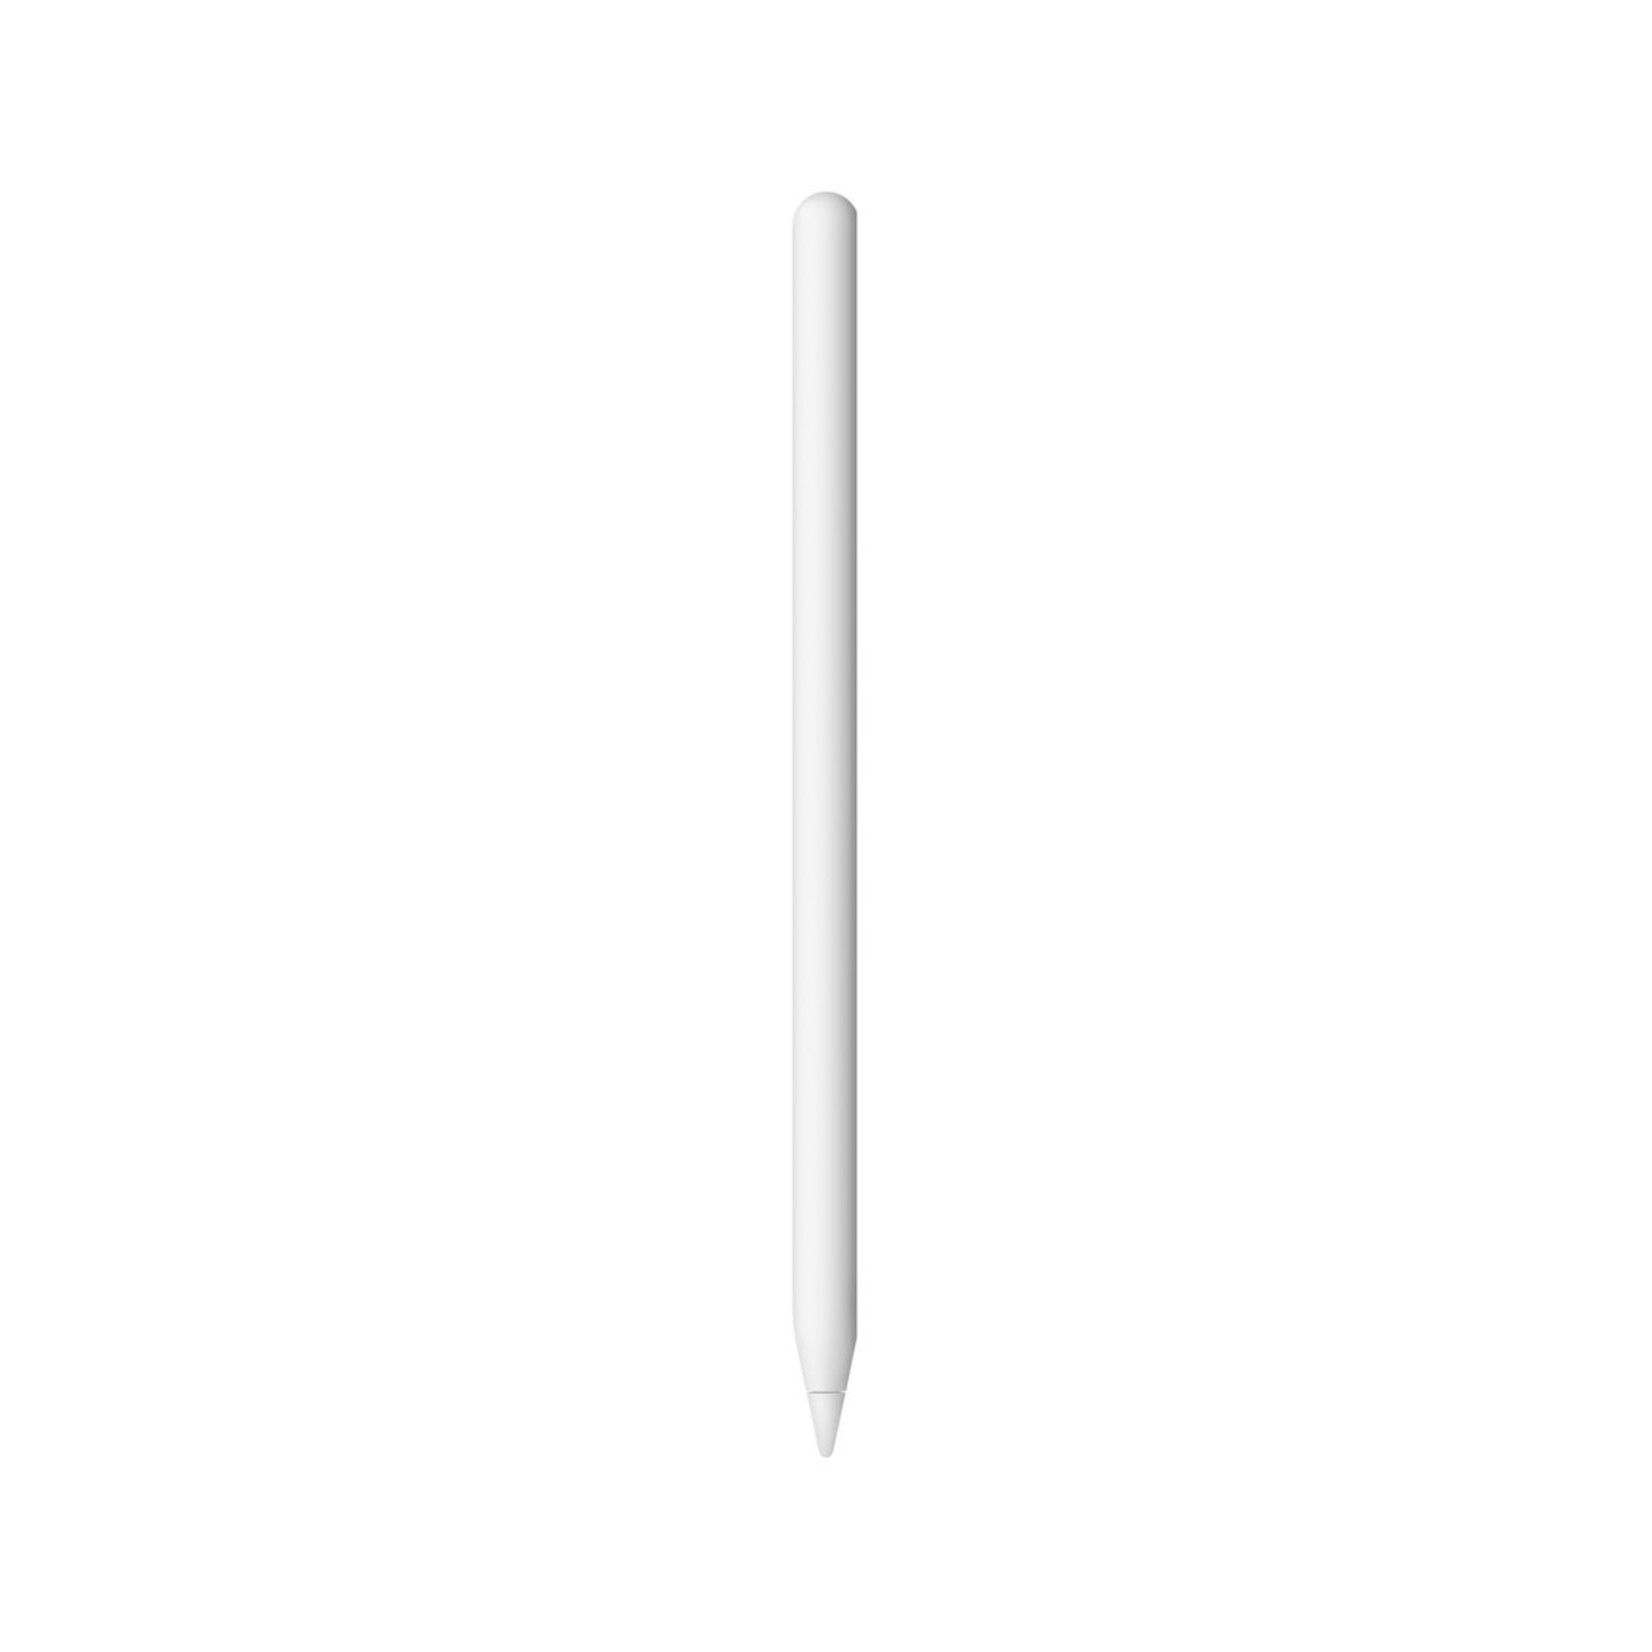 Apple Apple Pencil - 2nd Generation - for iPad Air and iPad Pro